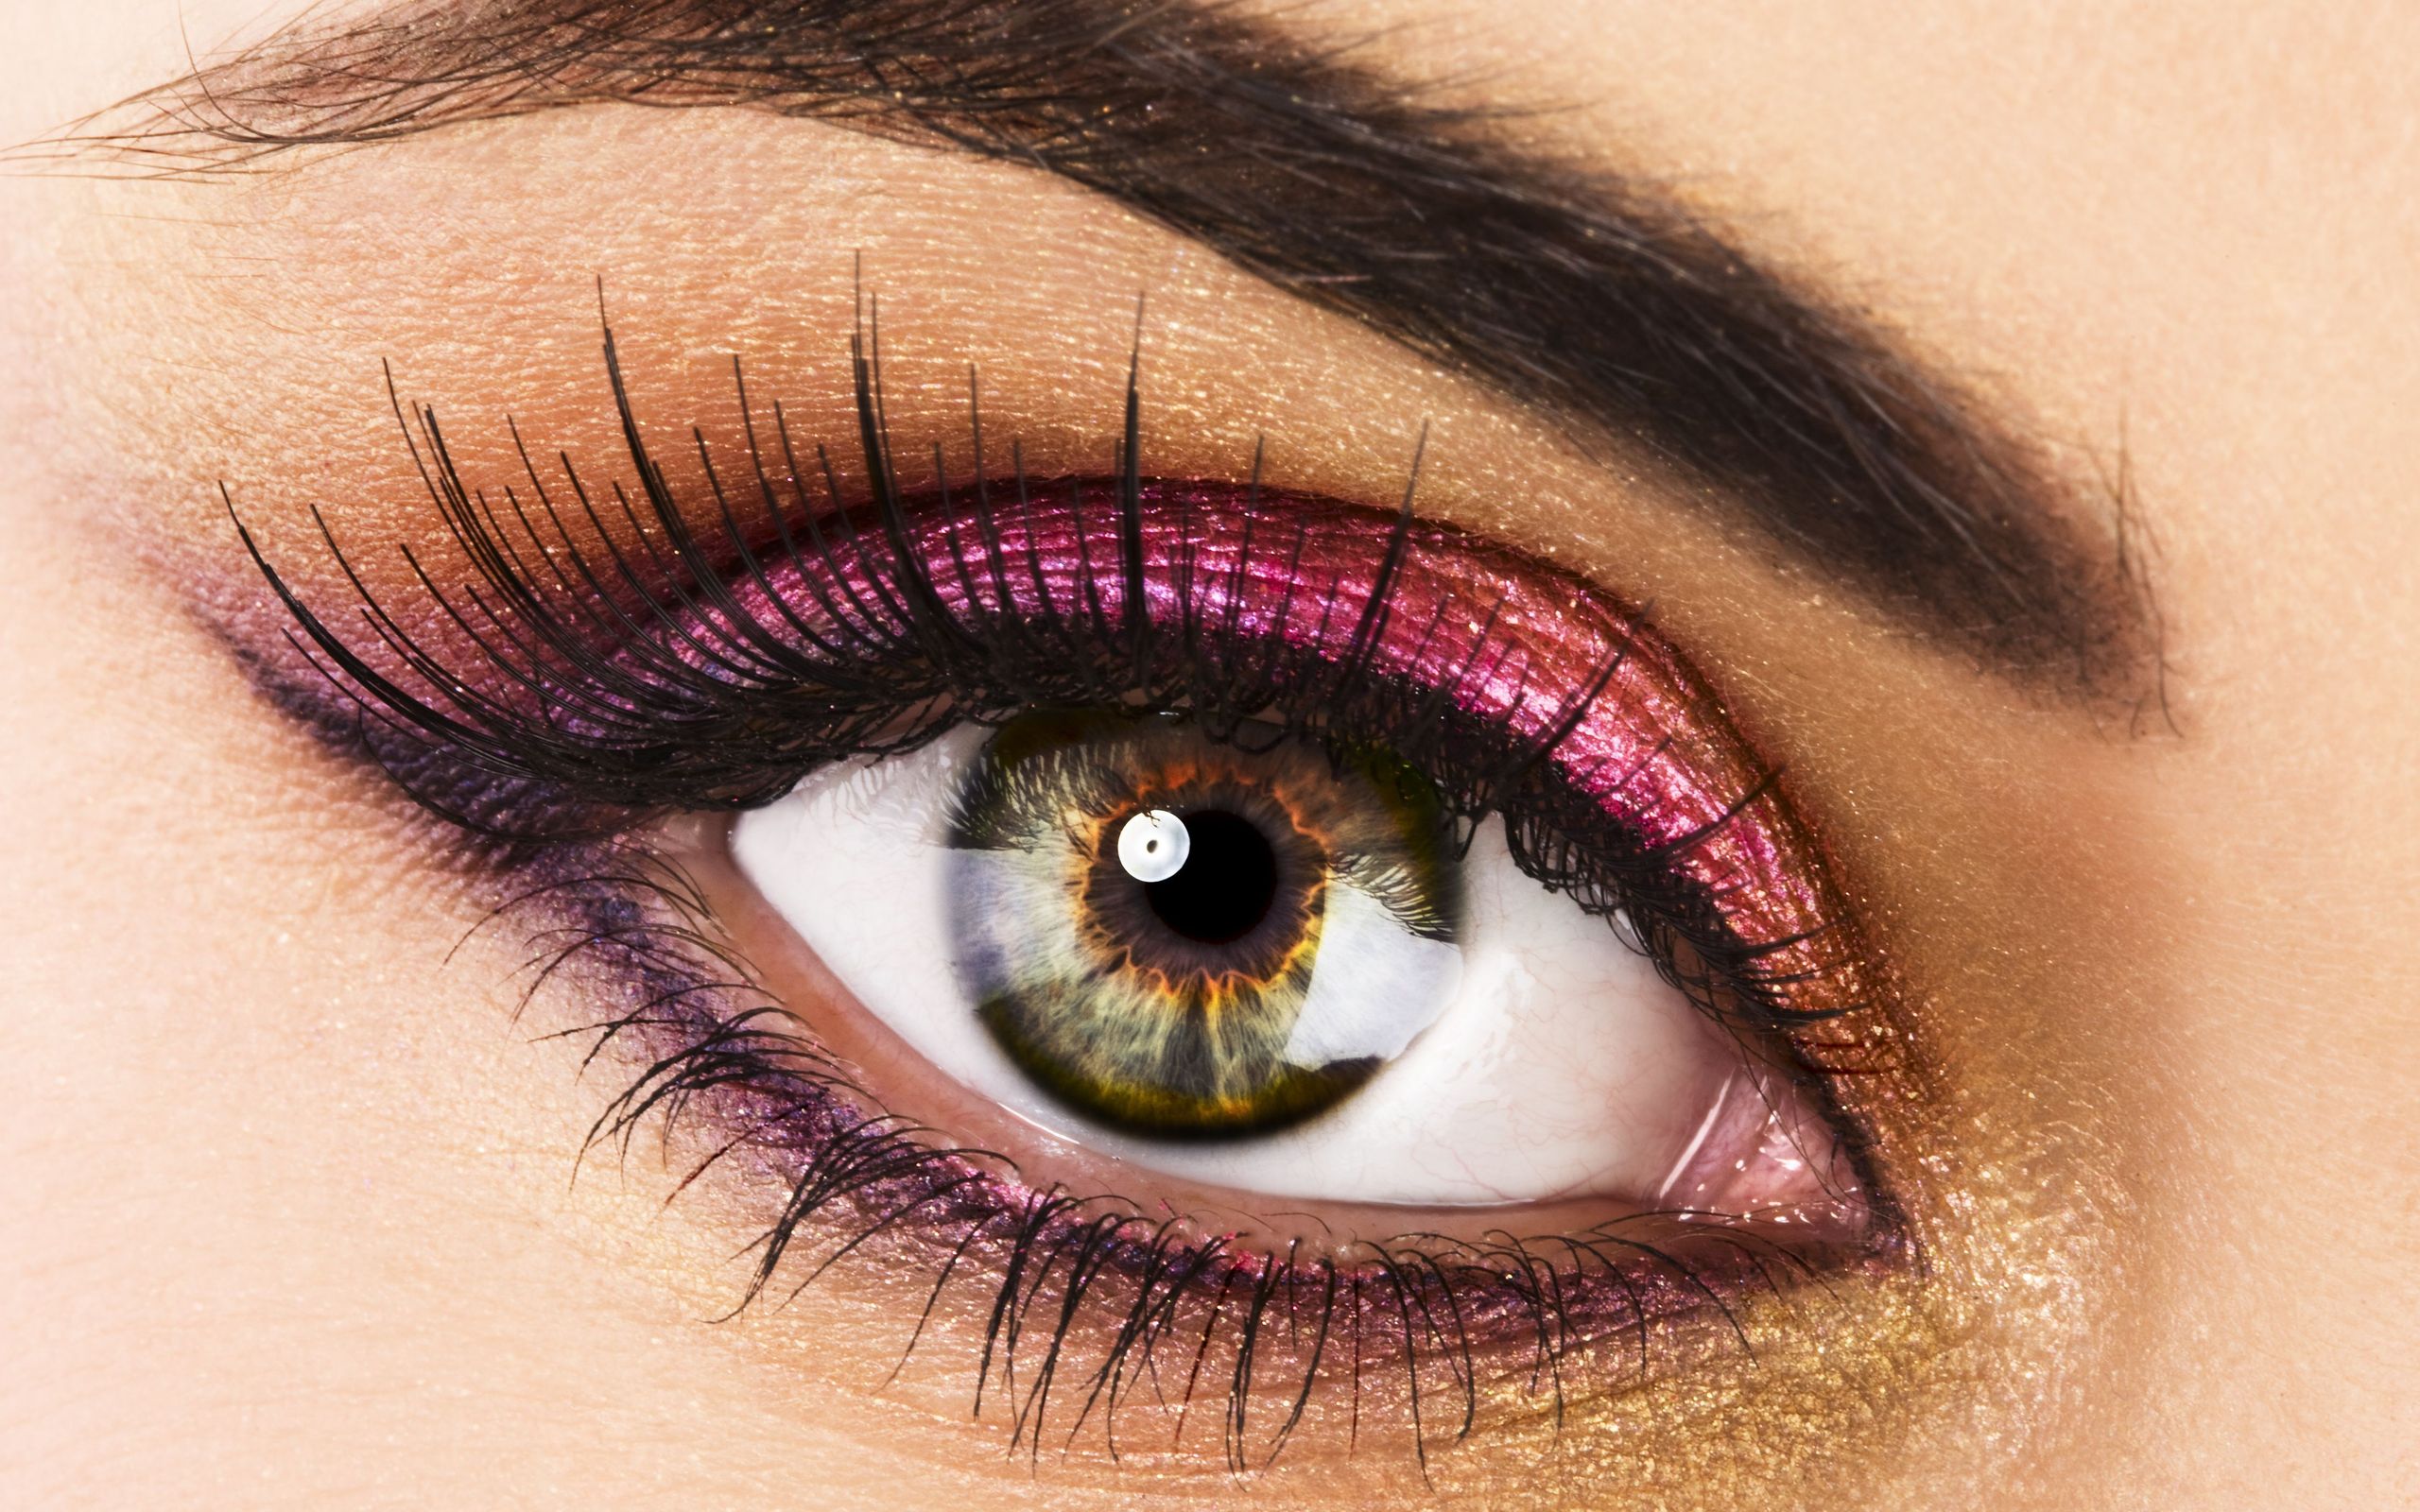 Vibrant close-up of a woman's eye